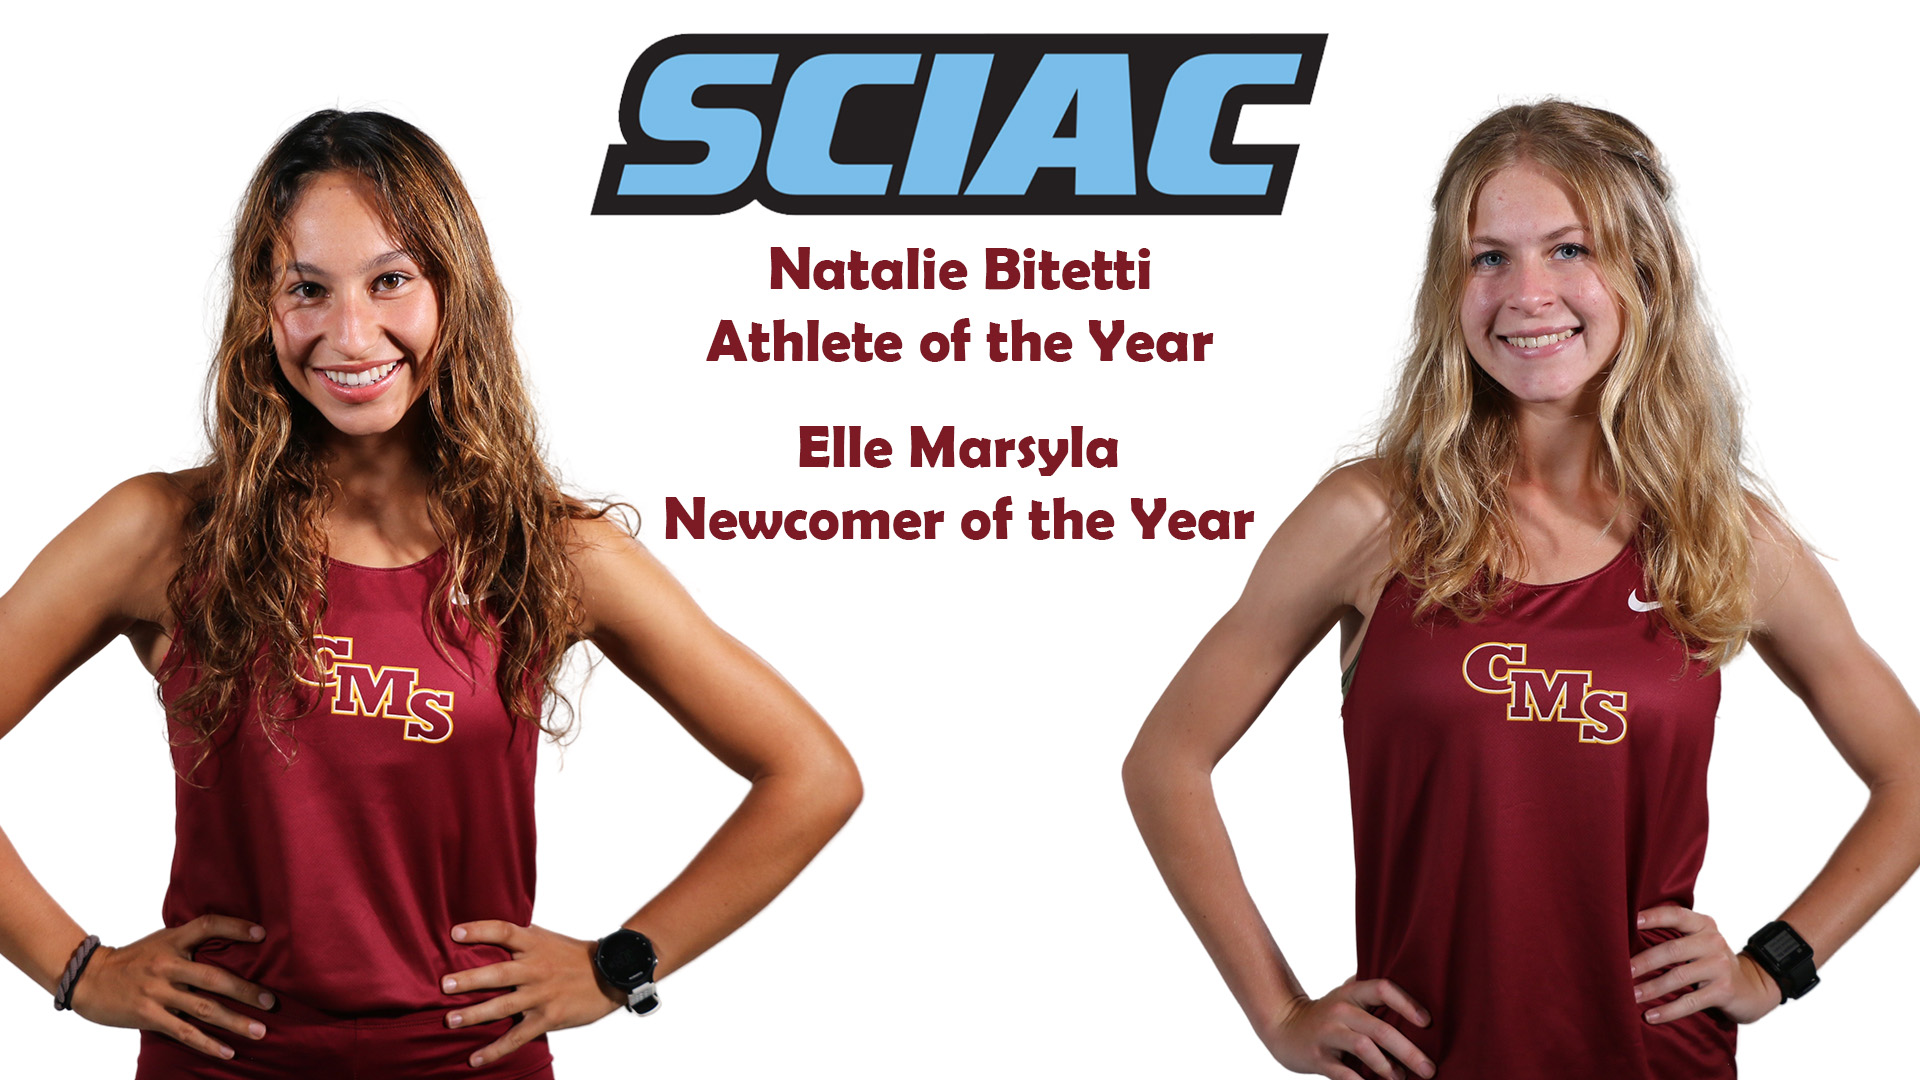 posed shots of Natalie Bitetti and Elle Marsyla with the SCIAC logo